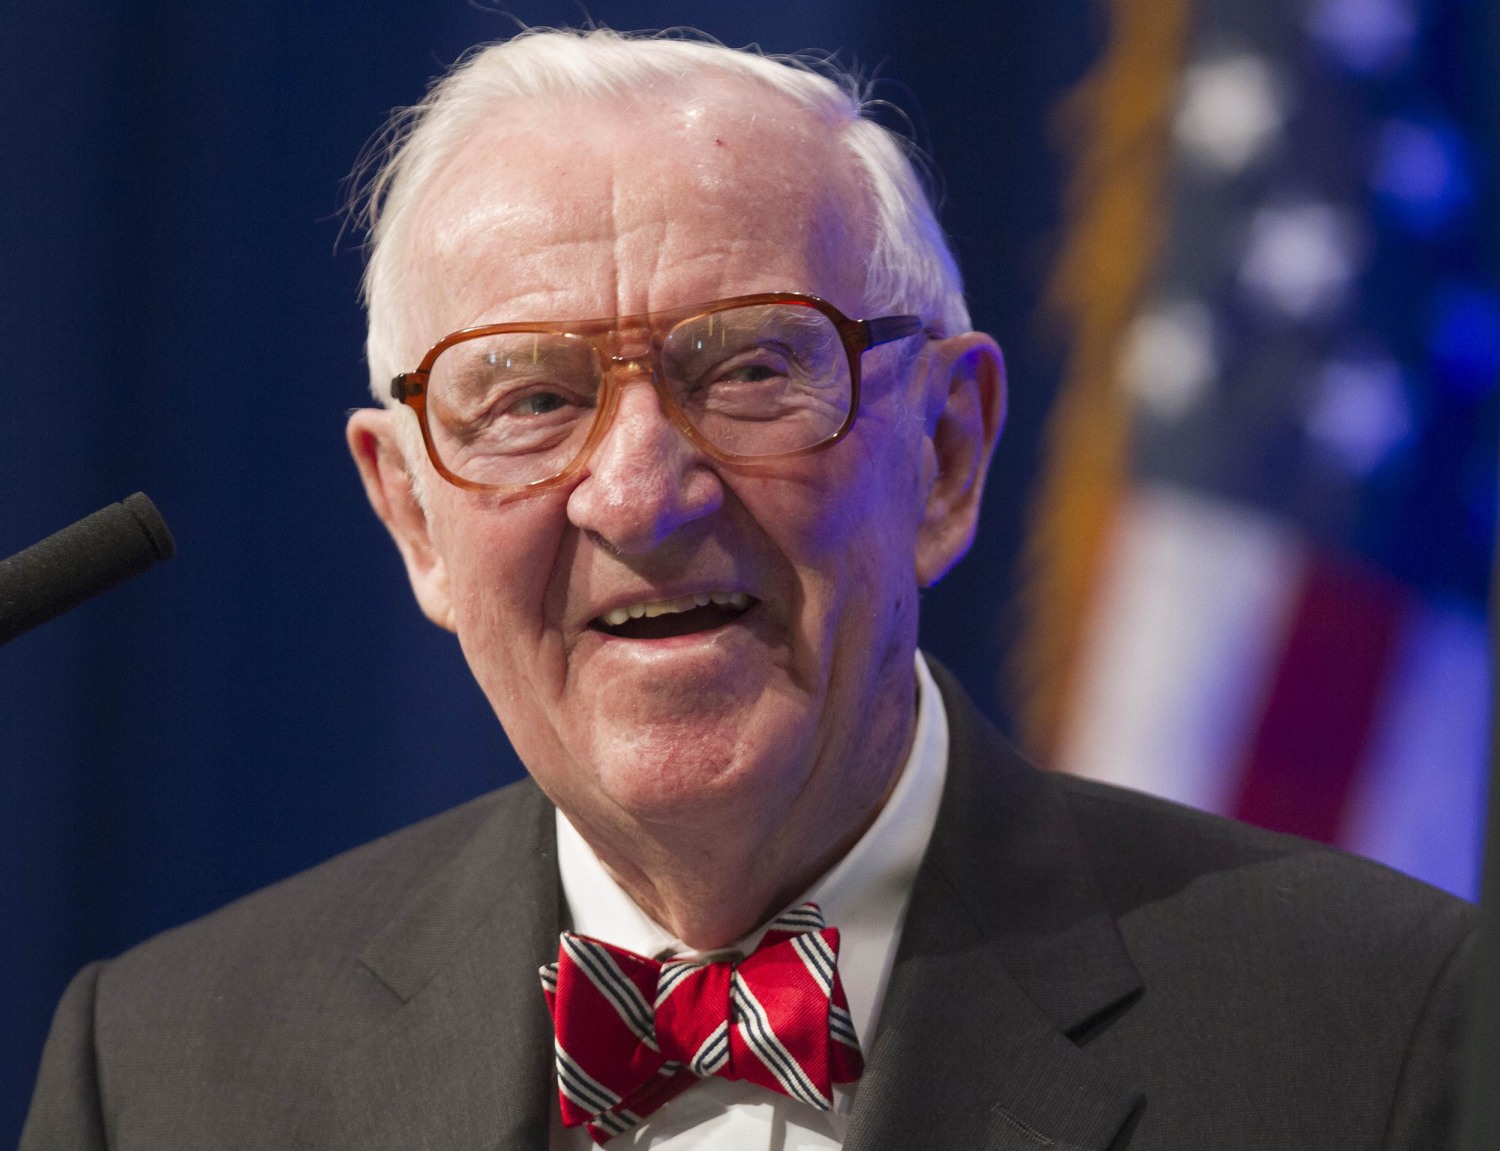 Supreme Court Justice John Paul Stevens, Who Led Liberal Wing, Dies at 99 -  The New York Times